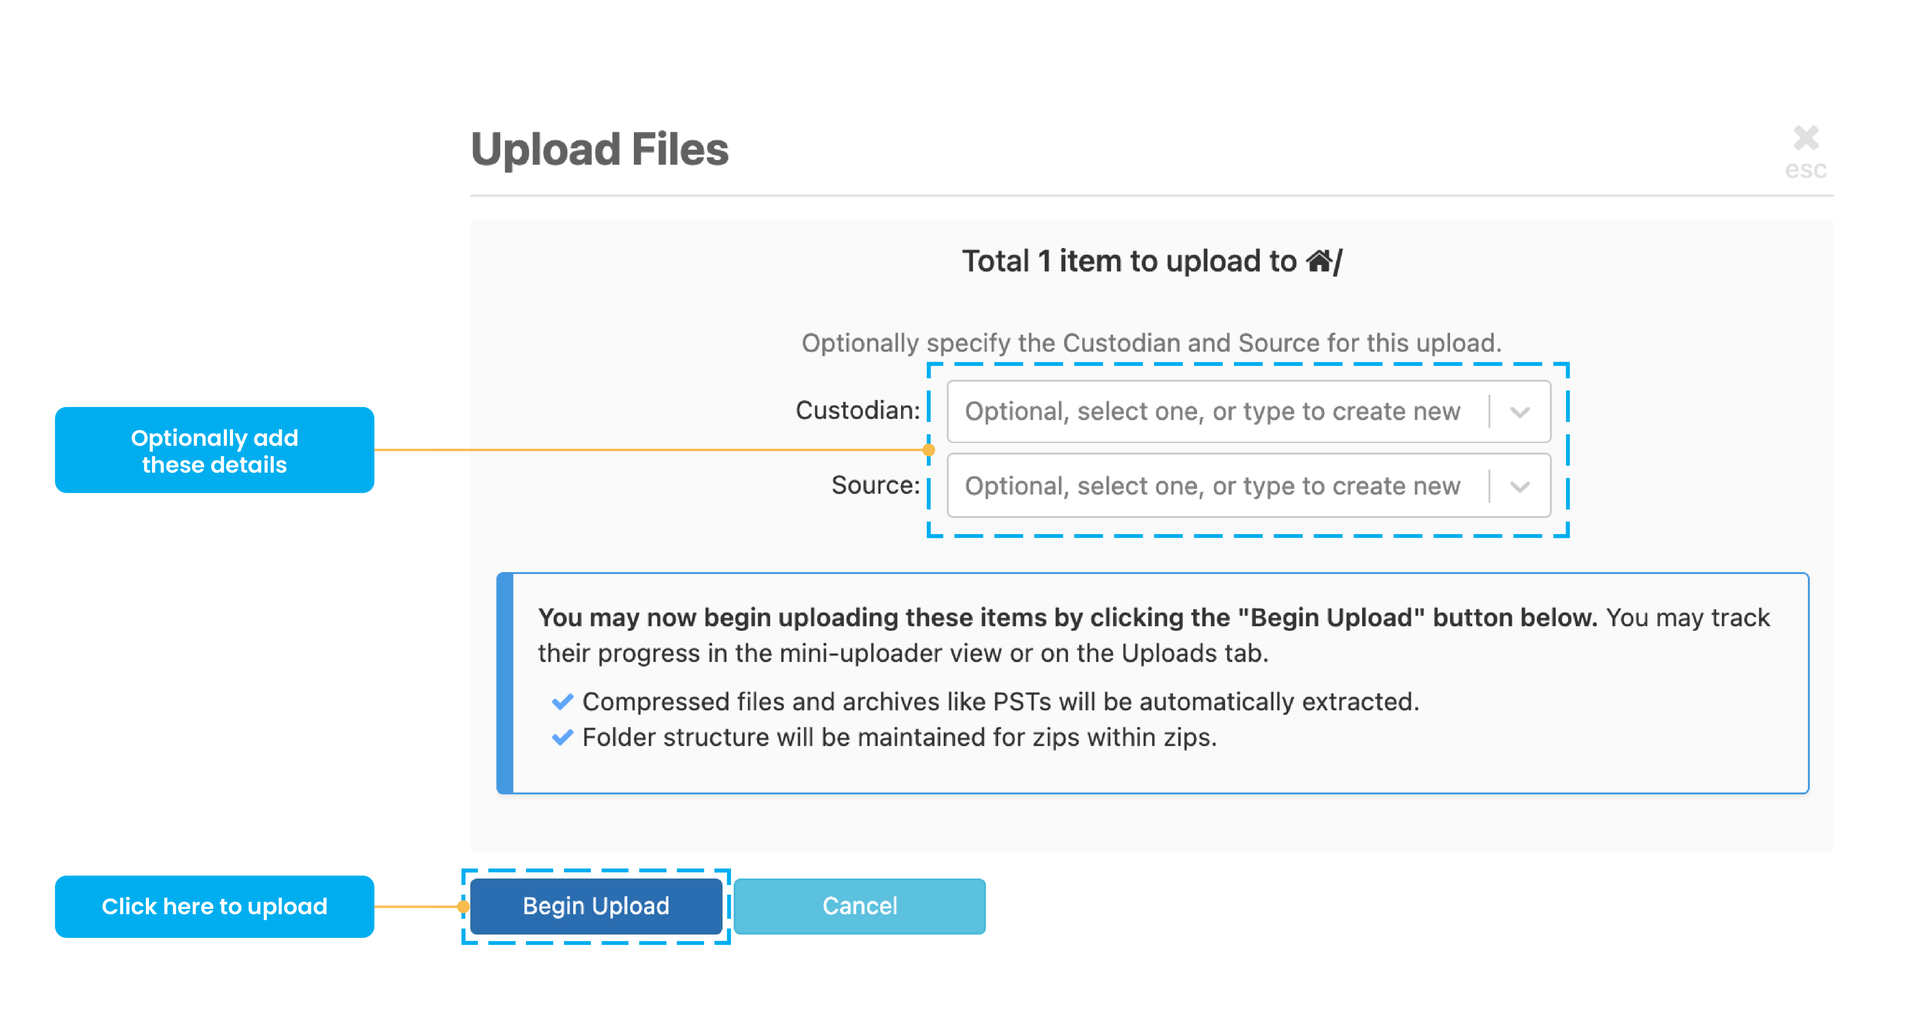 Add the details of the file to upload